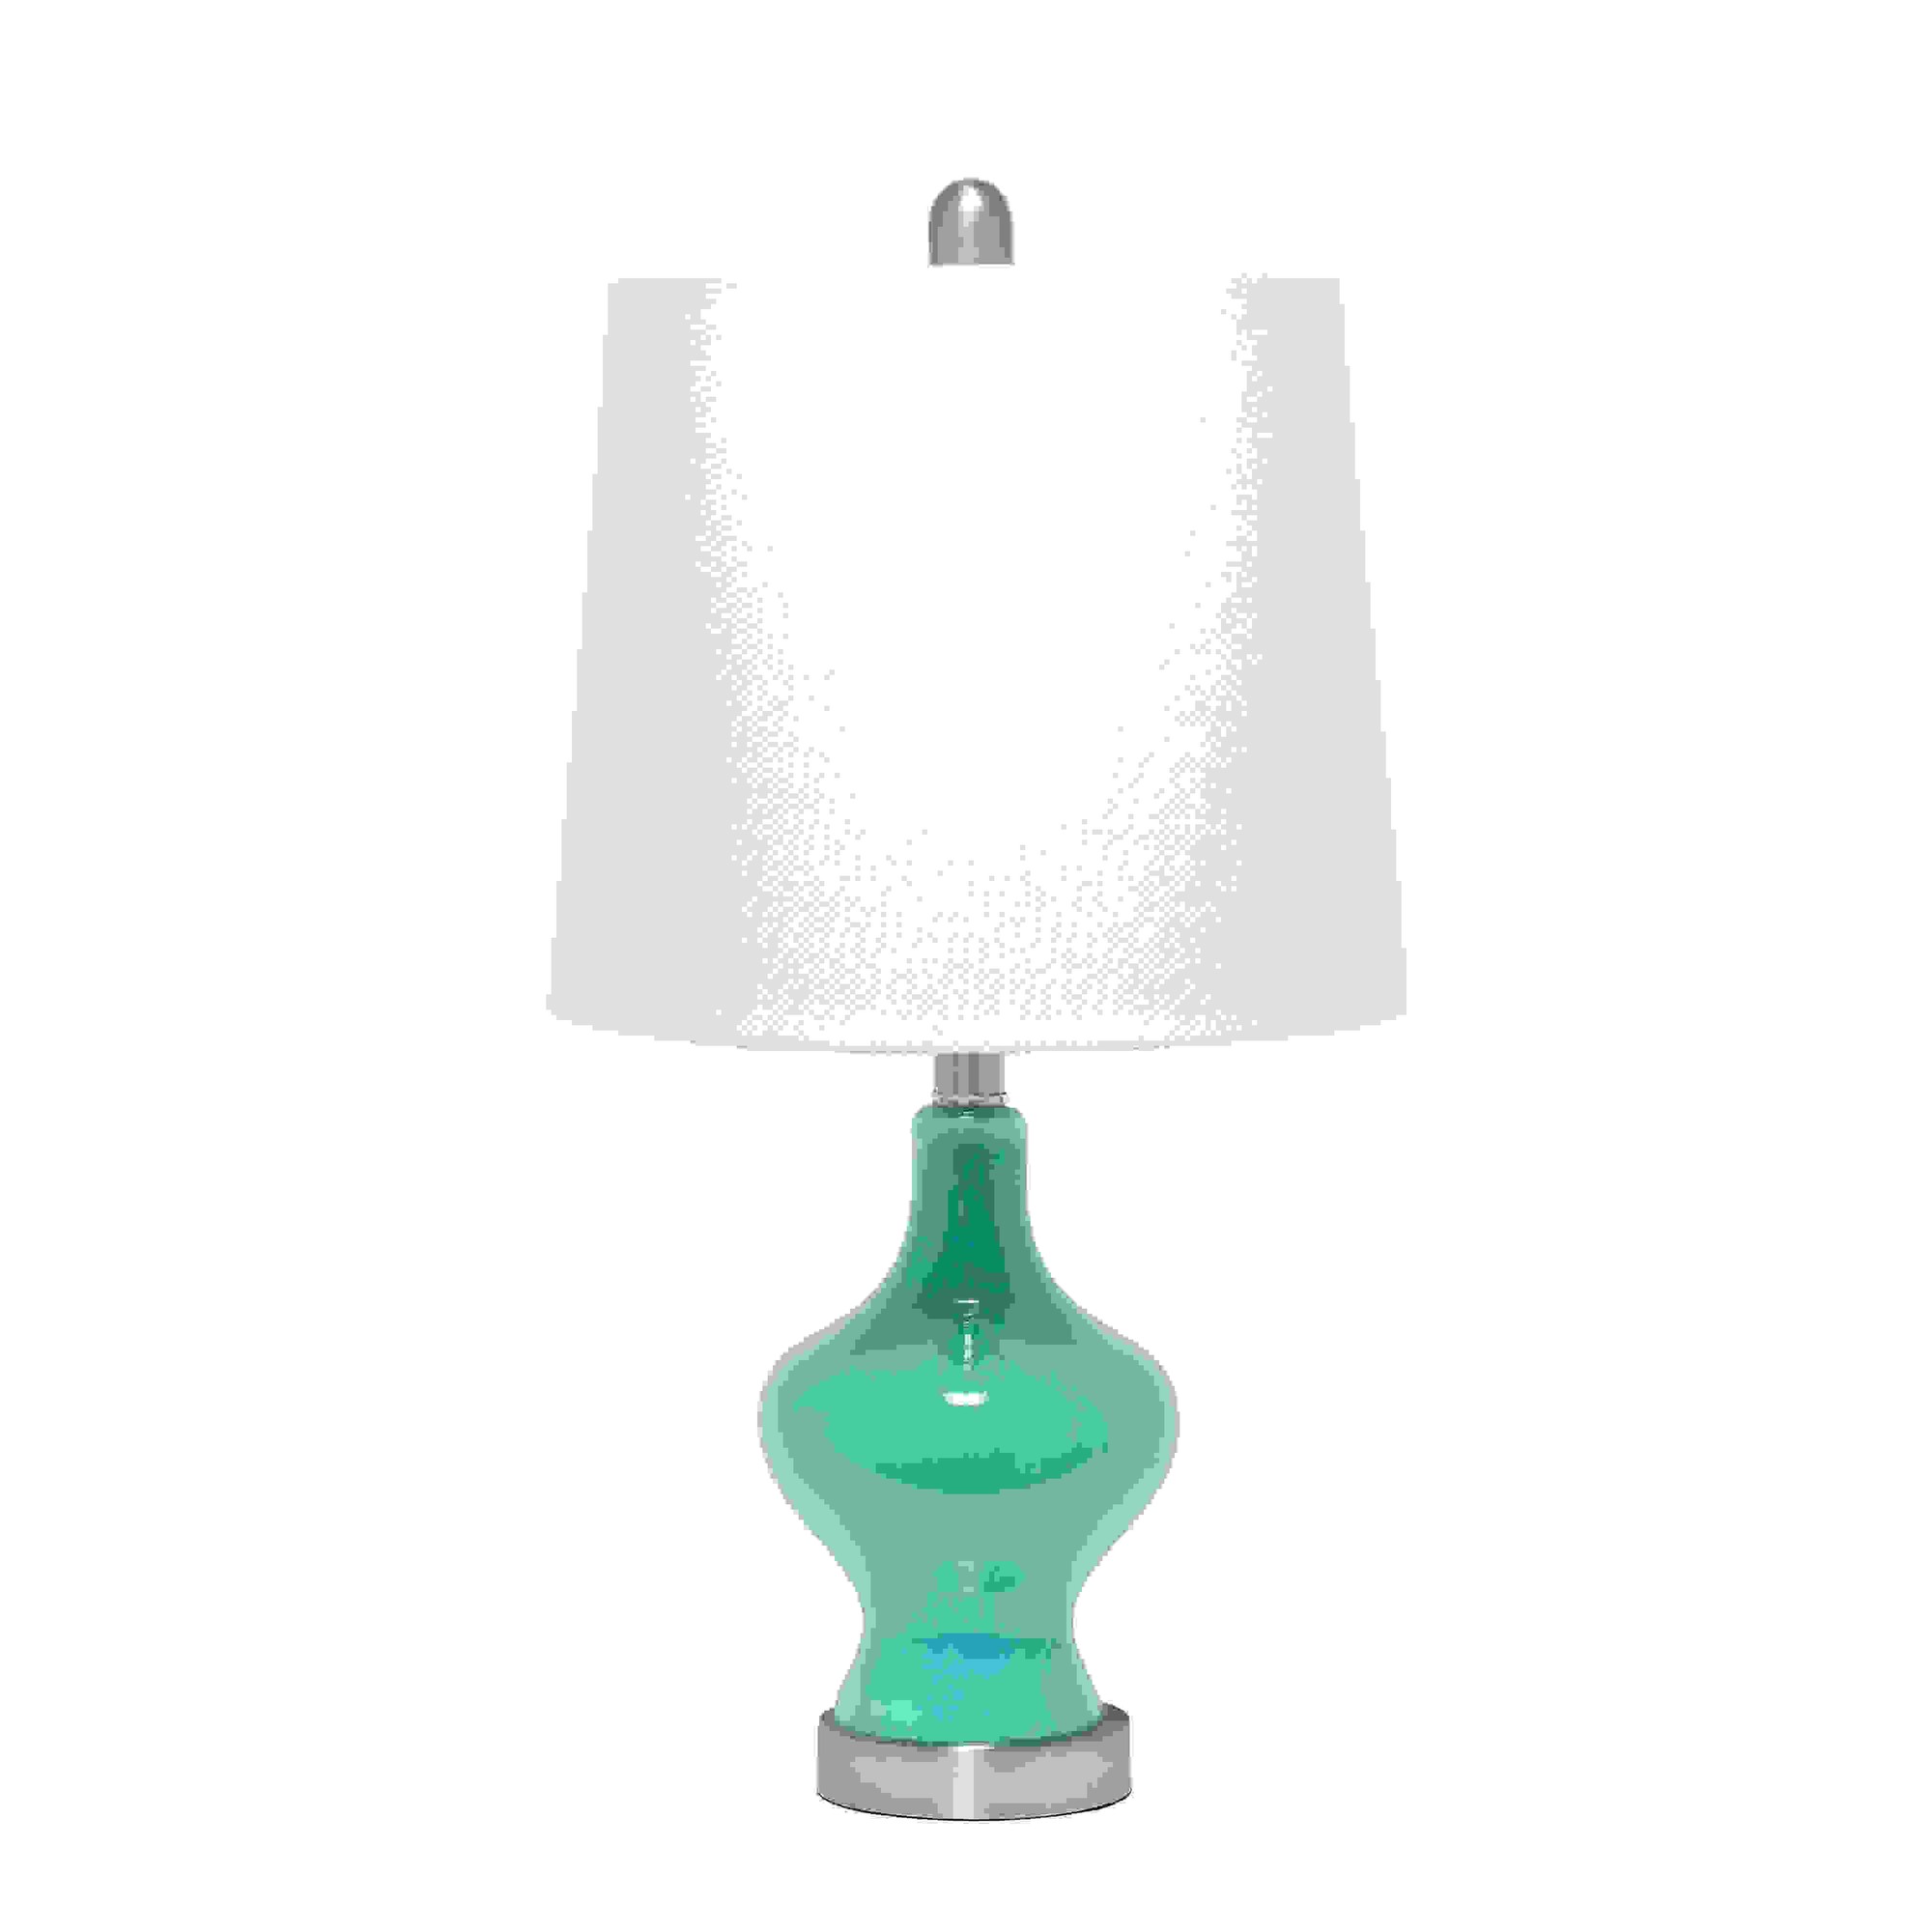  Lalia Home Paseo Table Lamp with White Fabric Shade, Teal